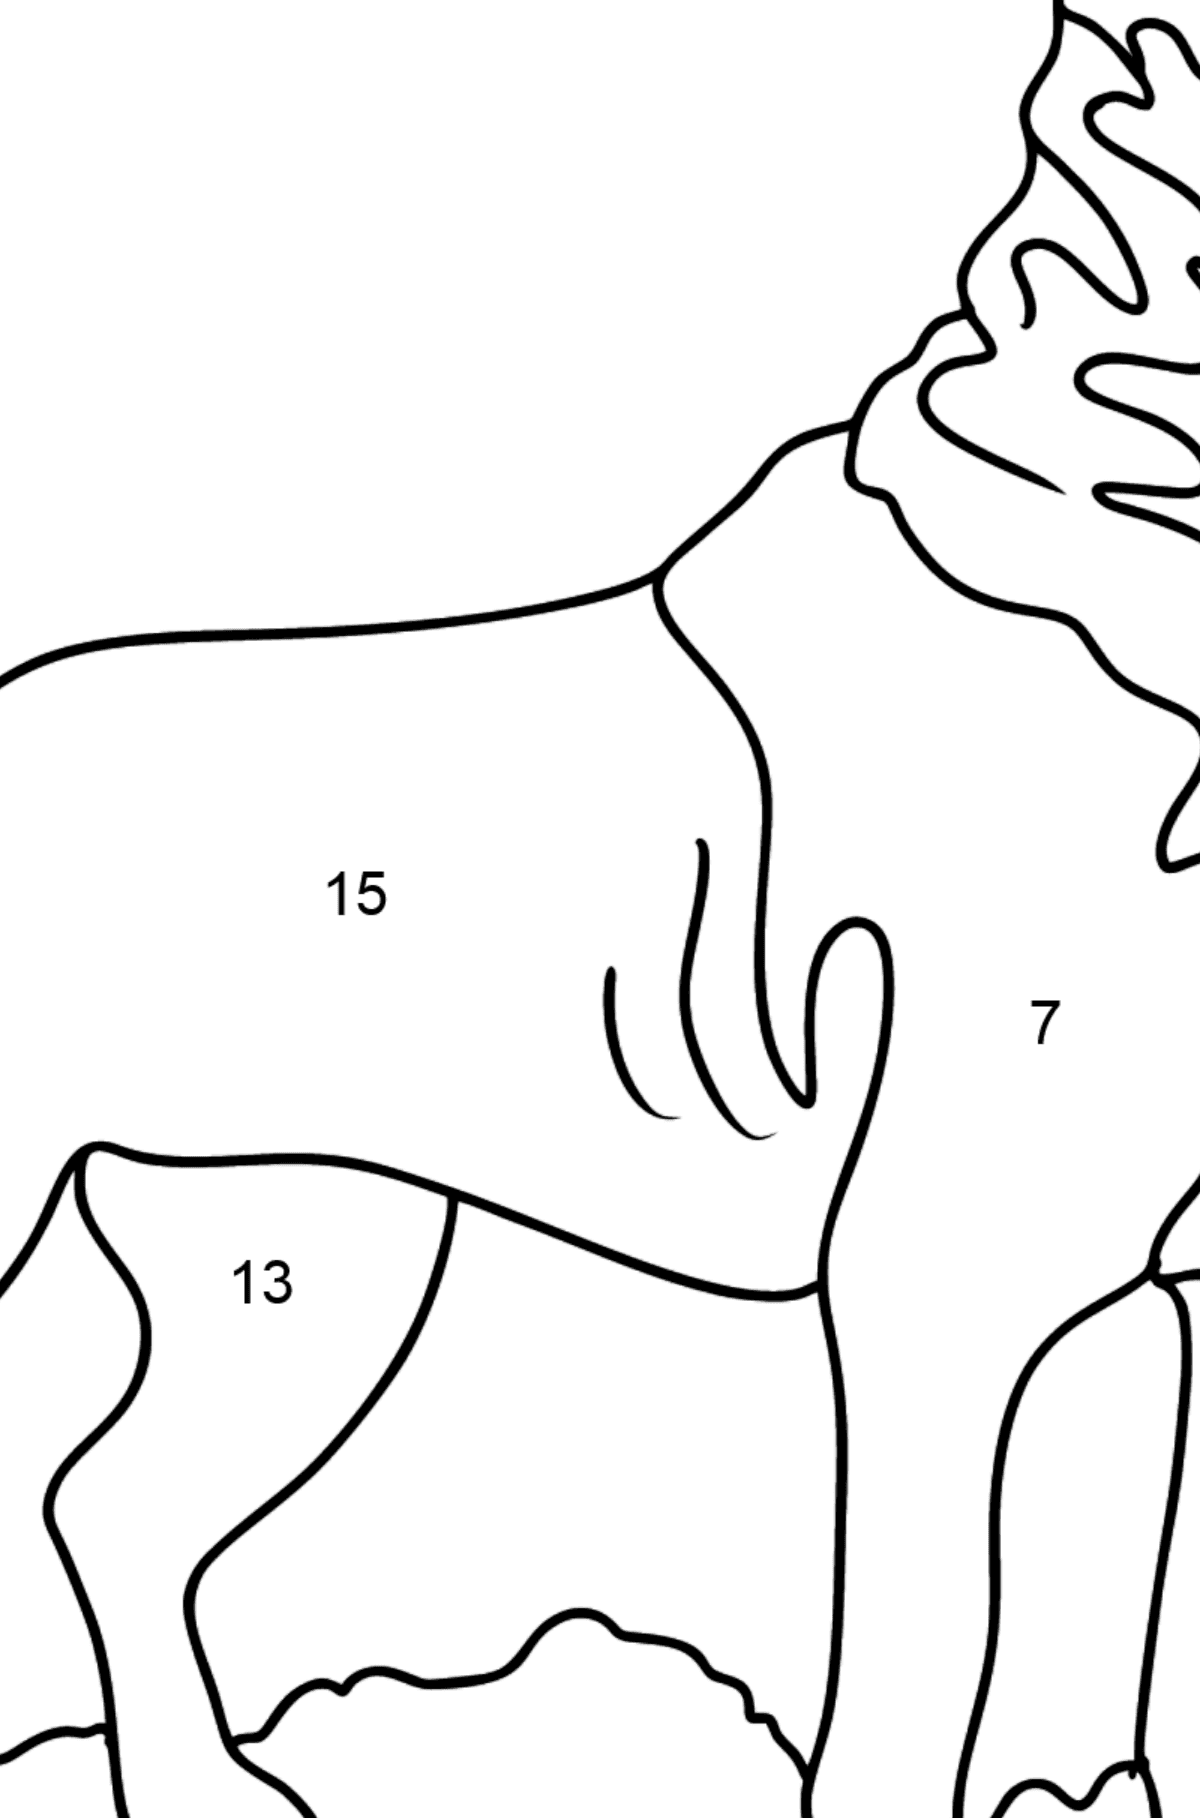 Rottweiler coloring page - Coloring by Numbers for Kids